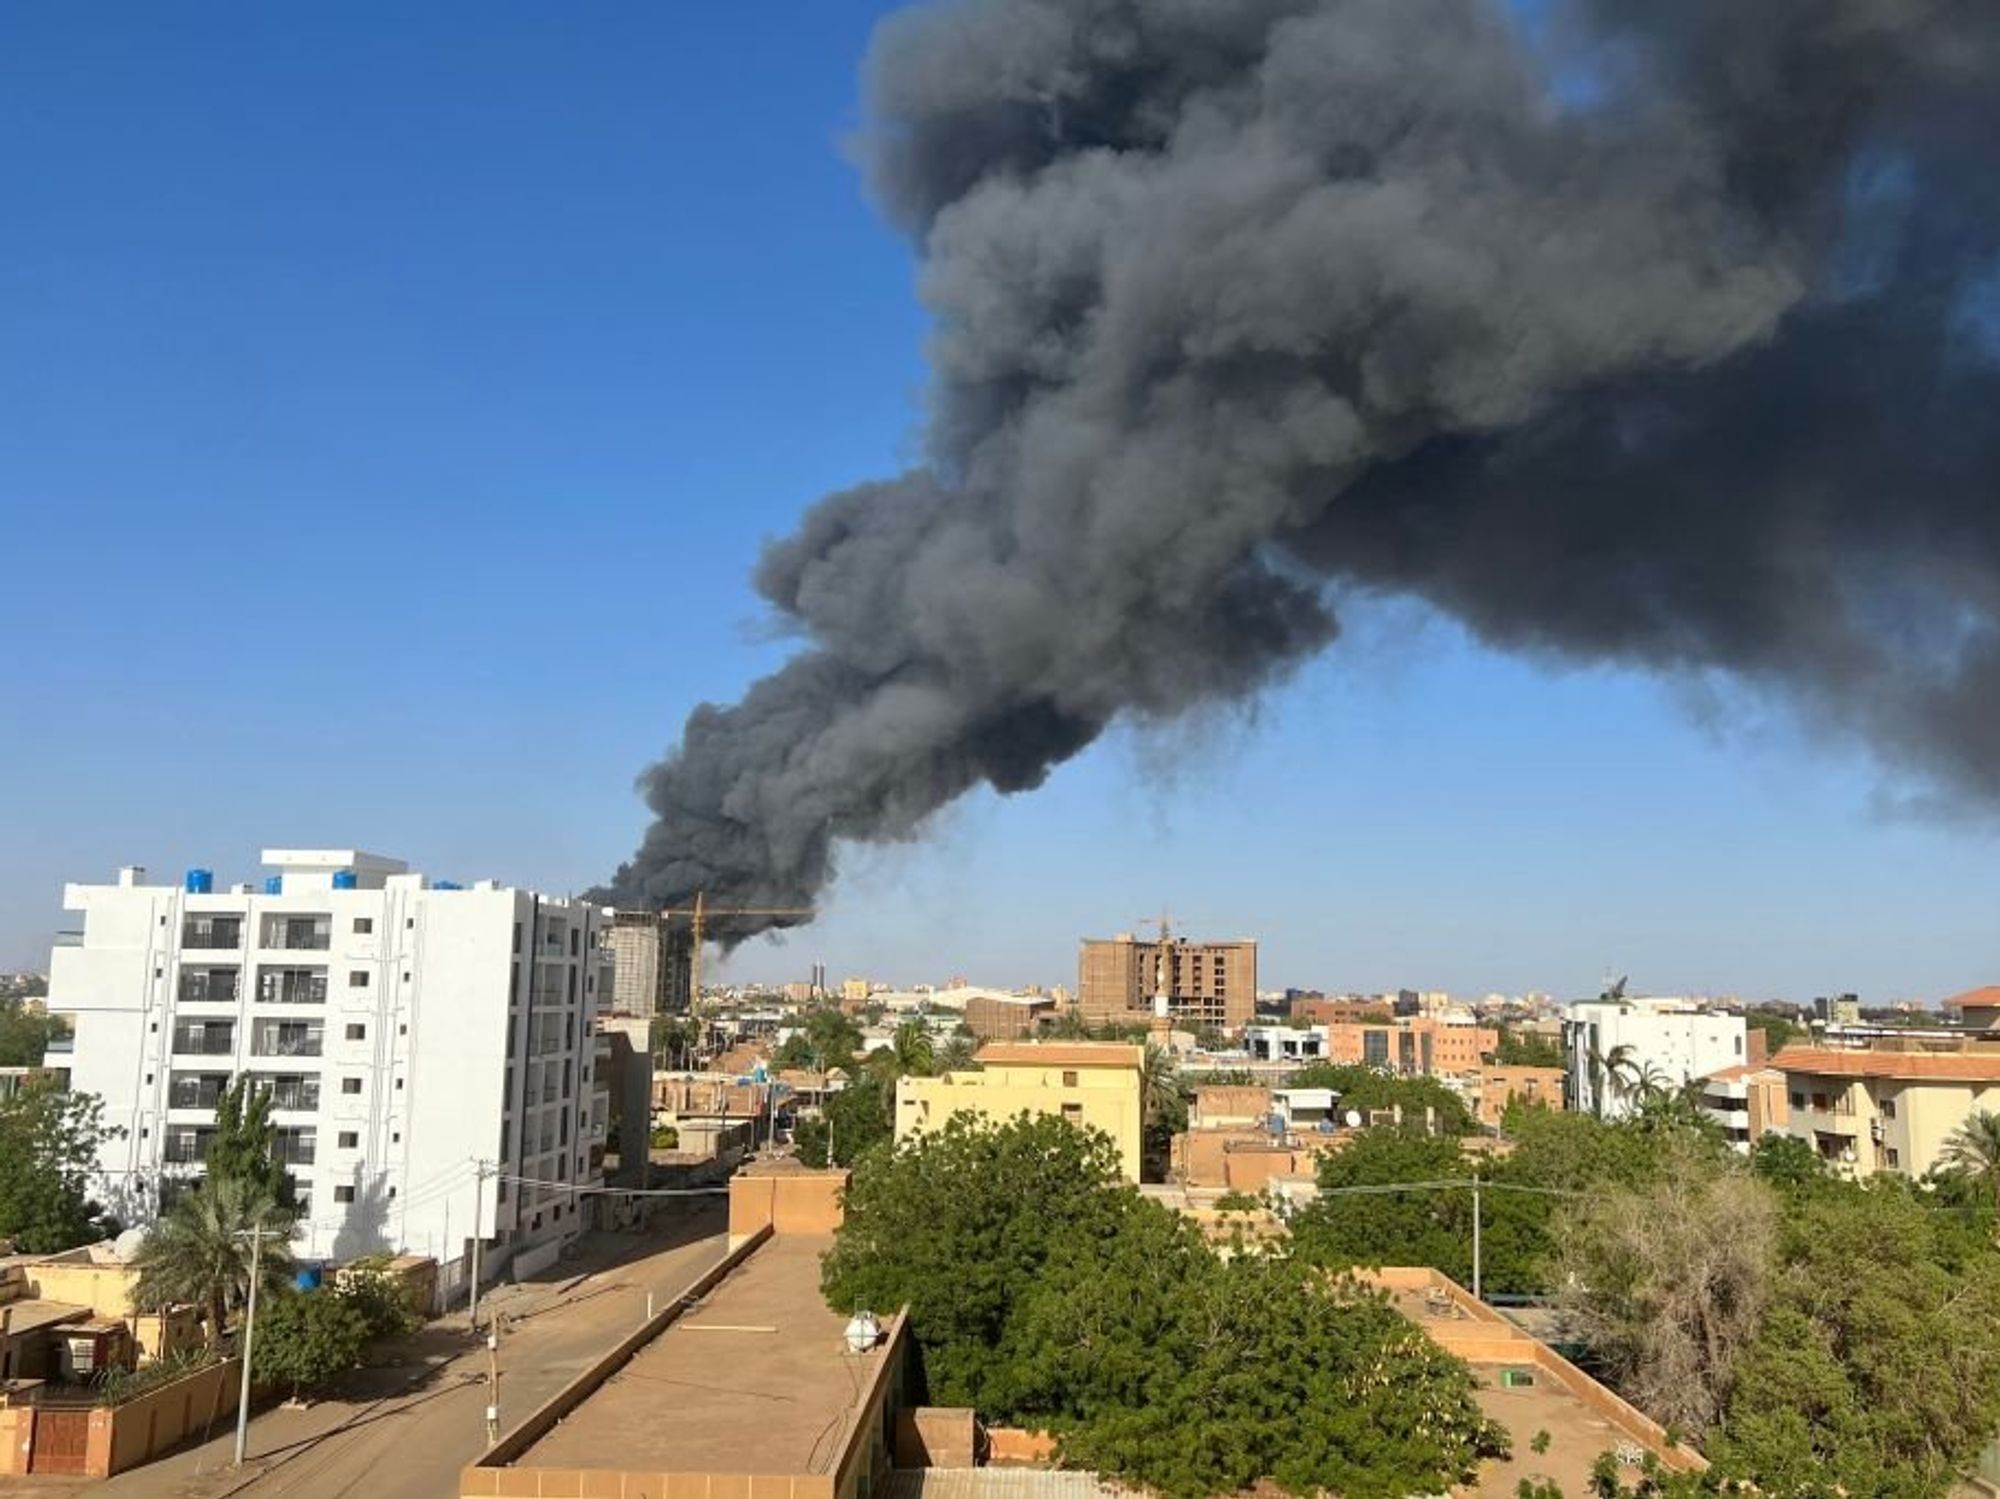 ​A column of smoke rises behind buildings near the airport area in Khartoum on April 19, 2023, amid fighting between the army and paramilitaries following the collapse of a 24-hour truce.